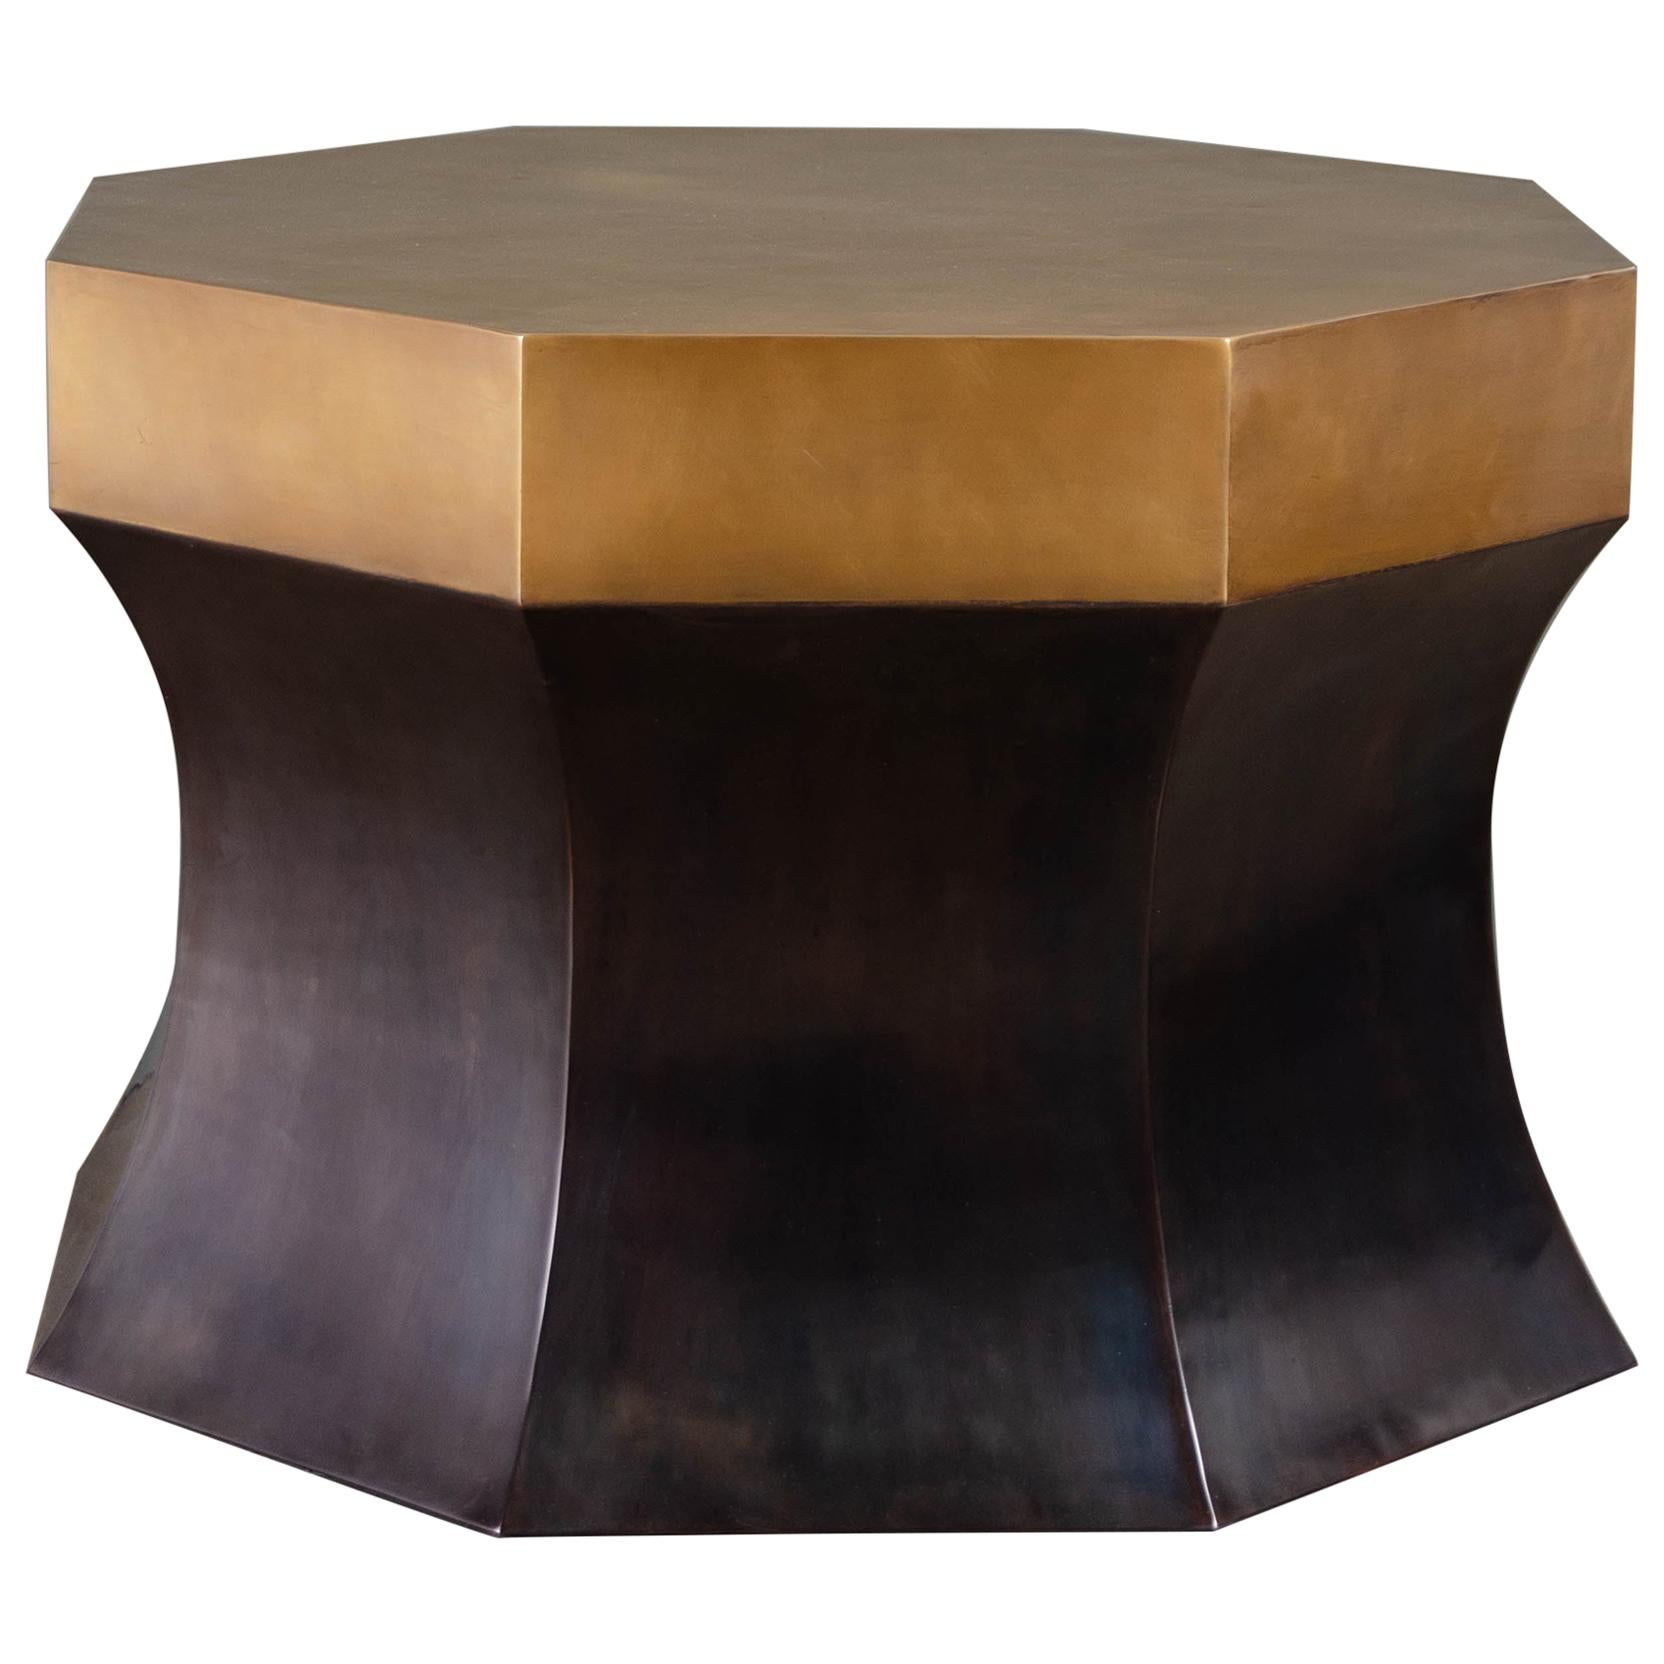 Octagonal Side Table with Brass, Antique Copper by Robert Kuo, Limited Edition For Sale